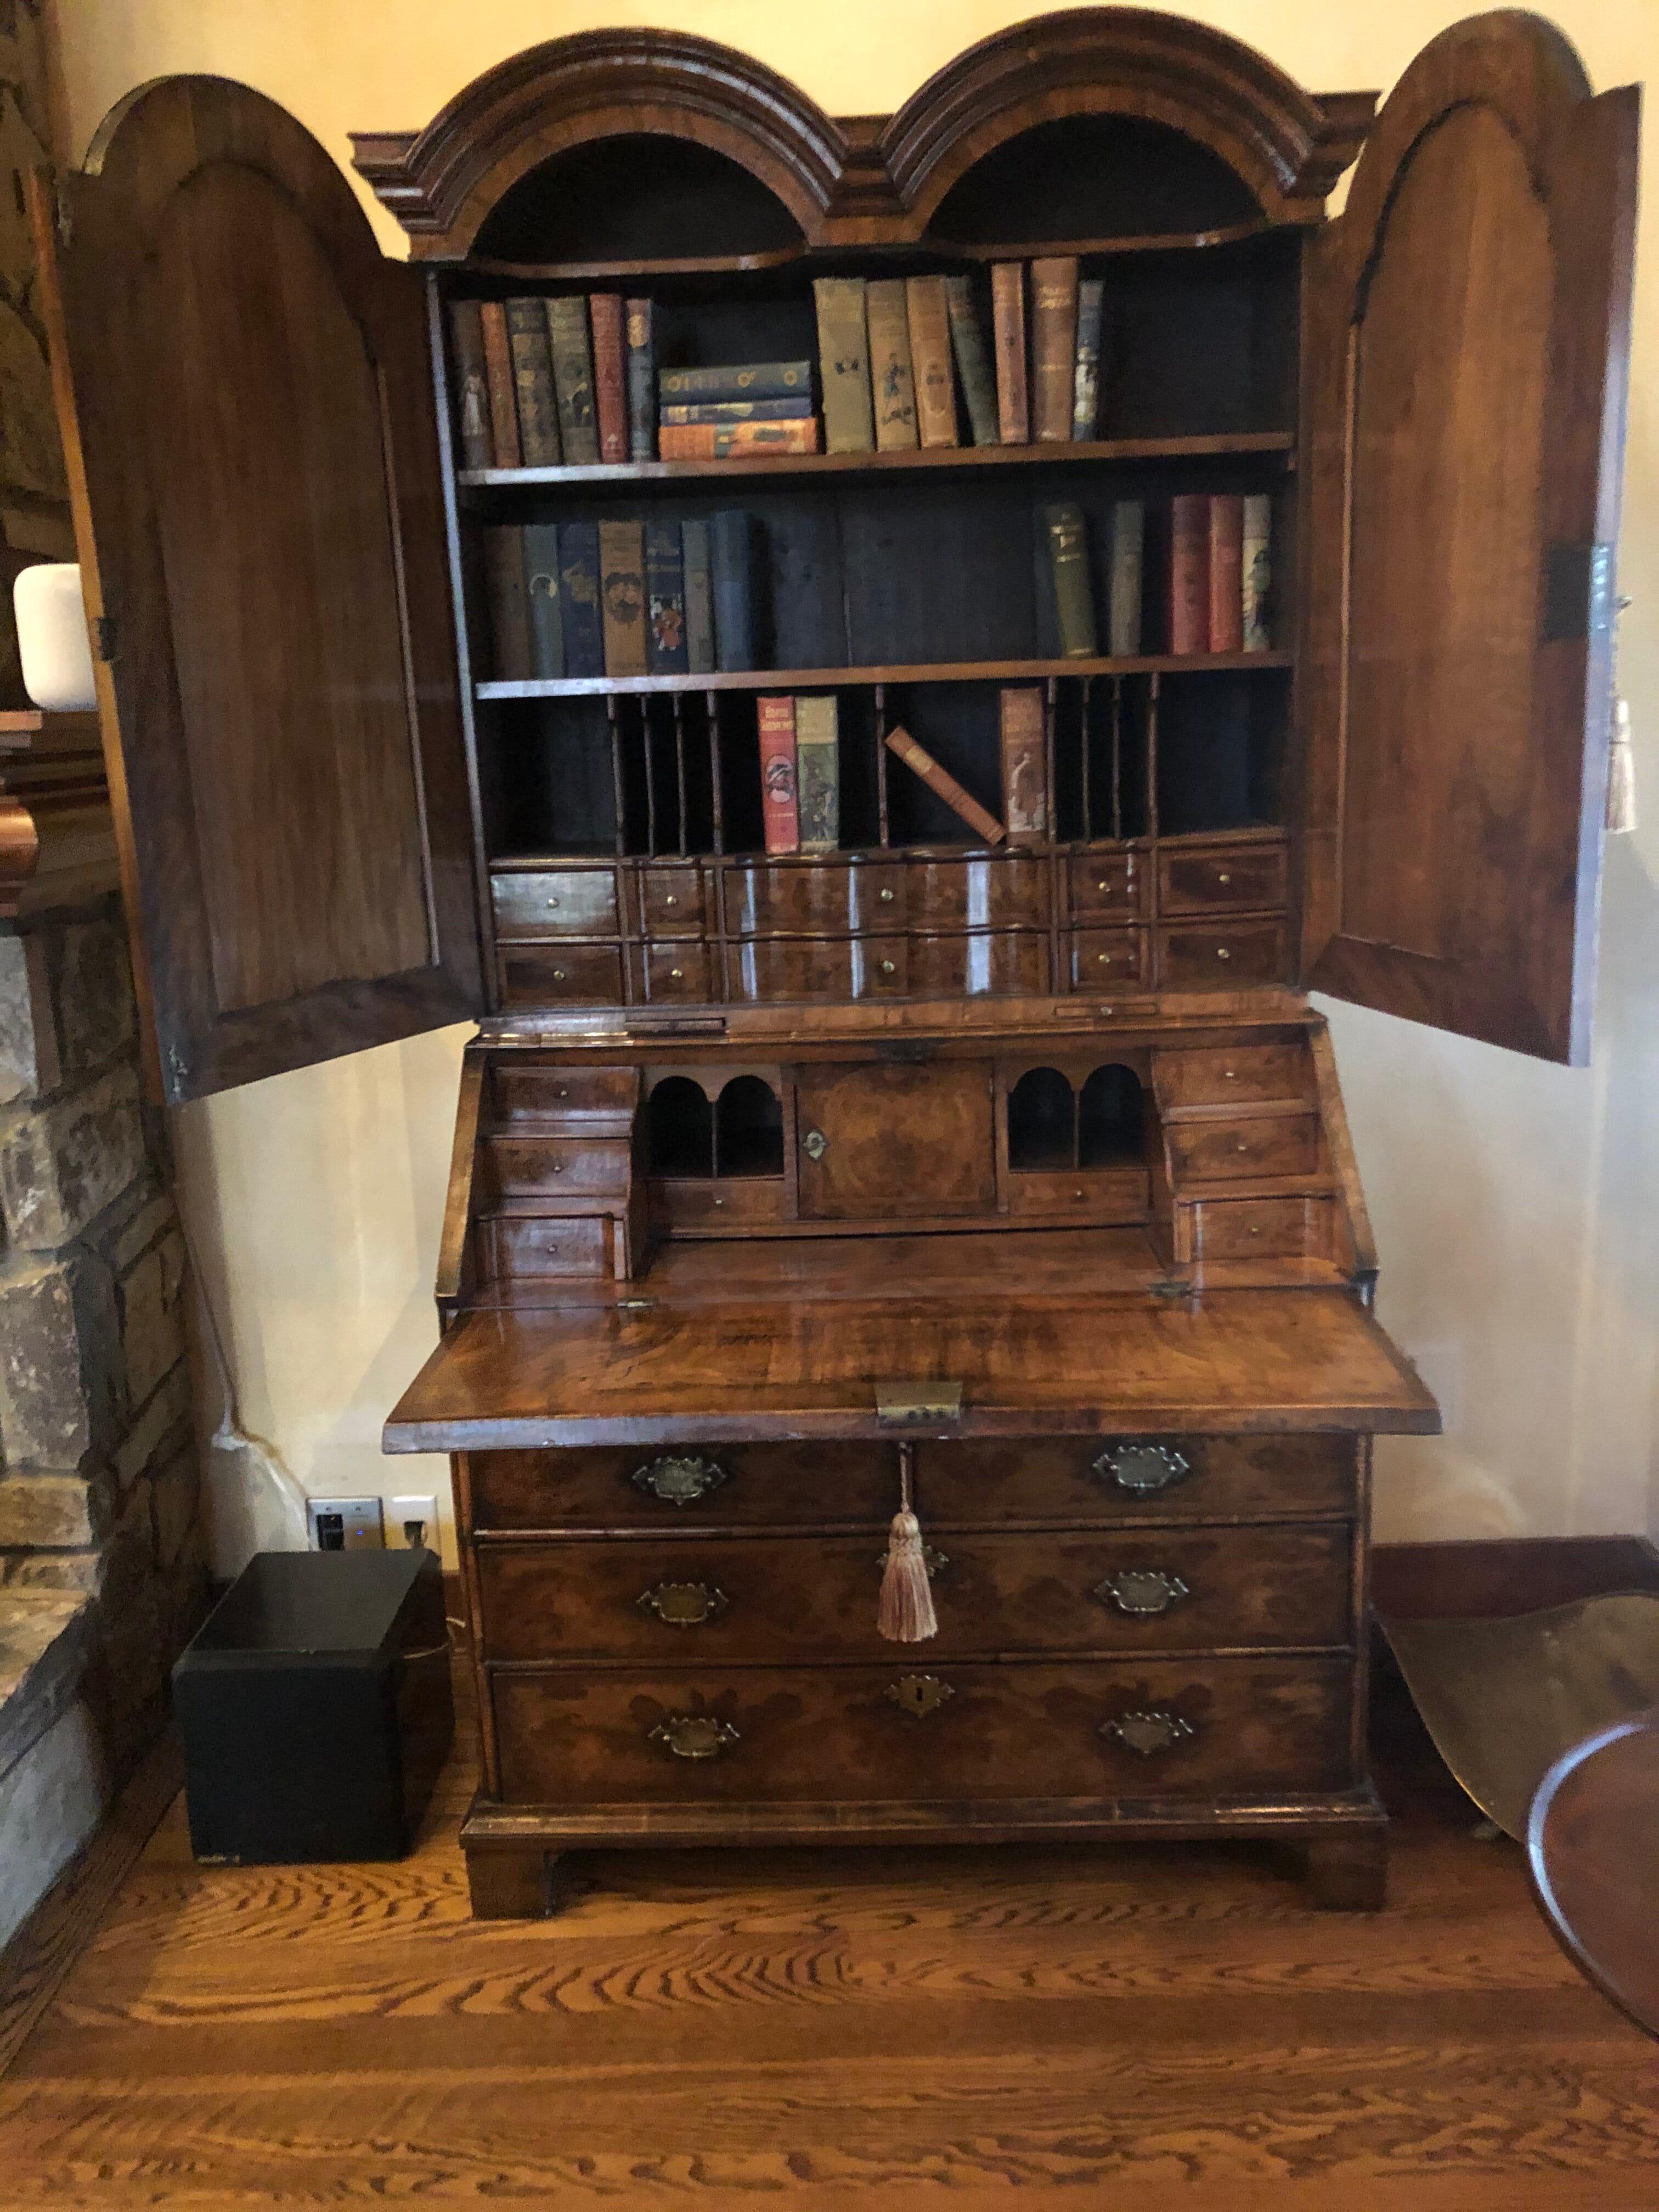 This 18th century William and Mary Bureau bookcase is outstanding. With its rich color and original condition, it is a fine example of the intricate craftsmanship that top quality cabinet makers provided during this period.
Beneath a “double dome”